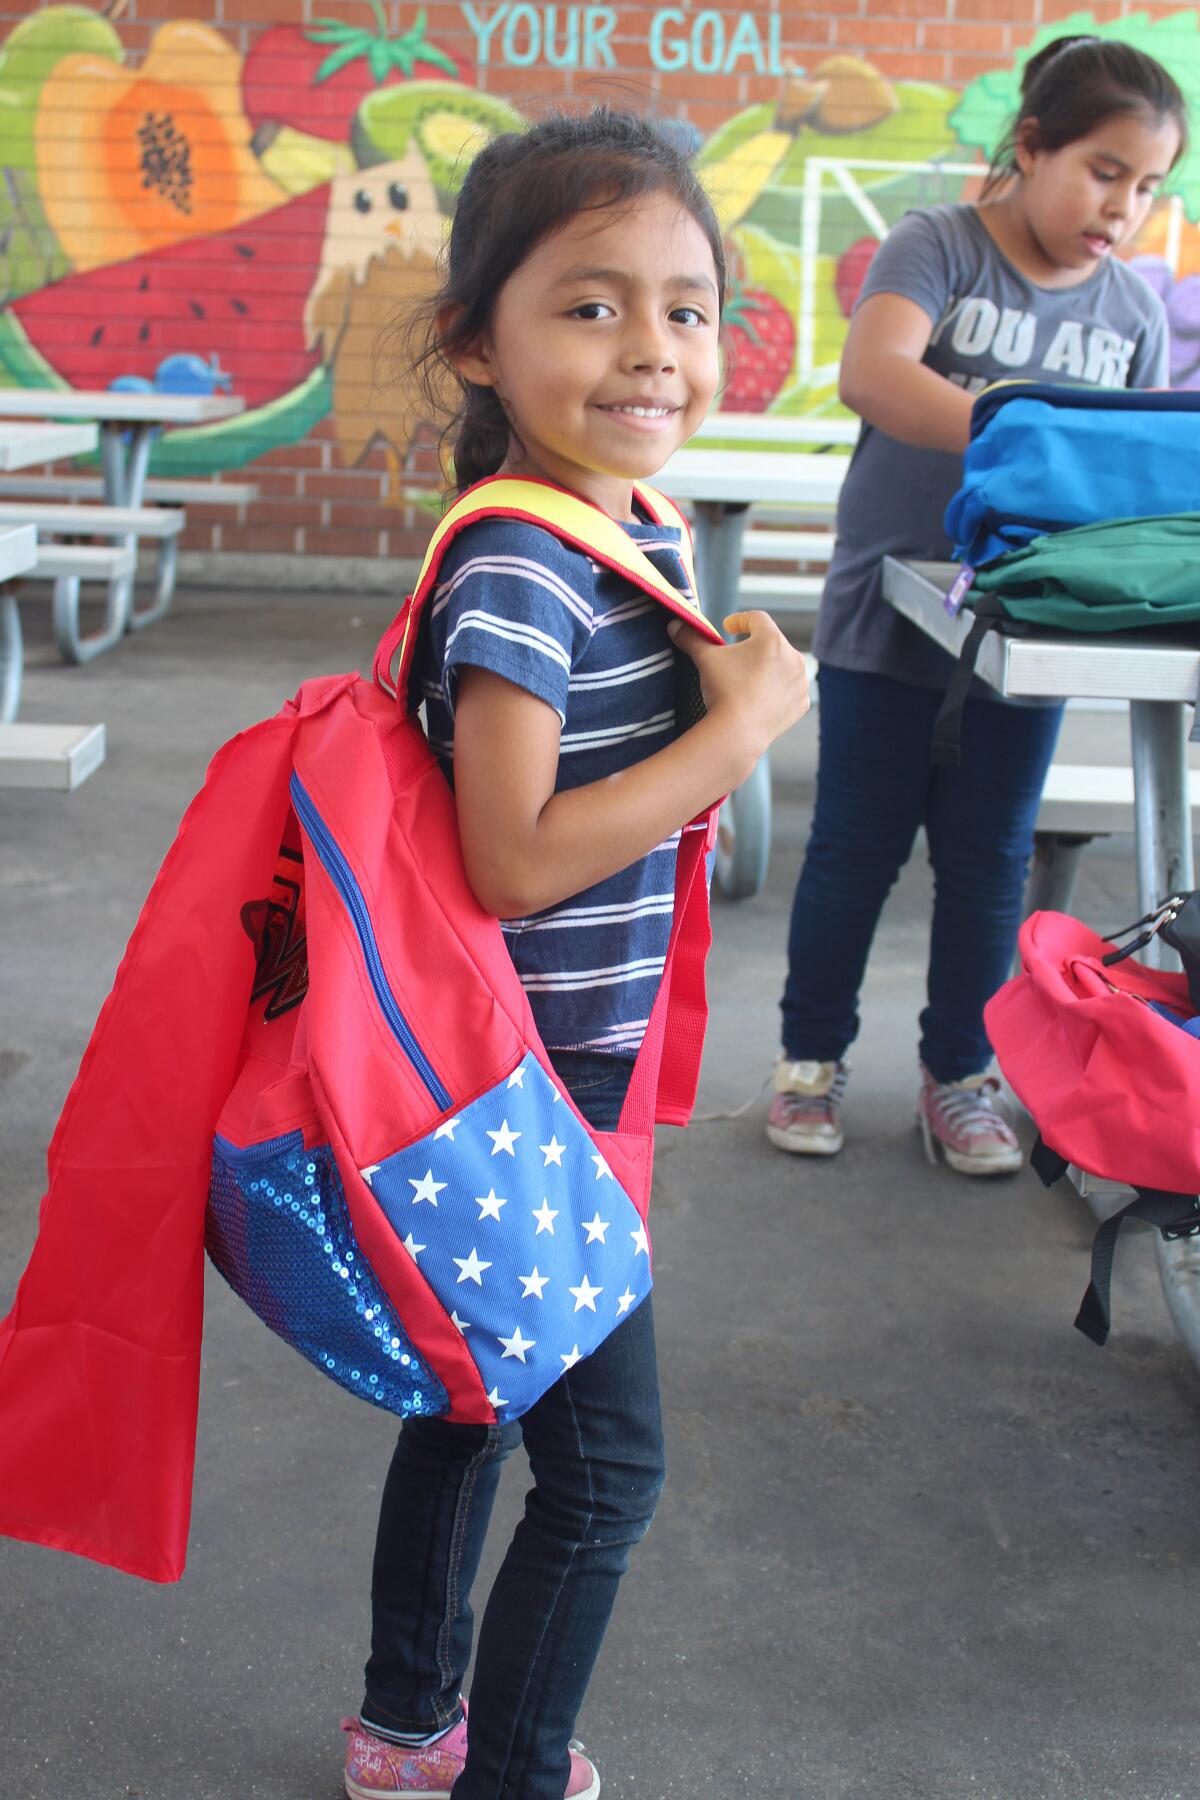 For 15 years, CAP OC has delivered backpacks and school supplies throughout Central and North Orange County.